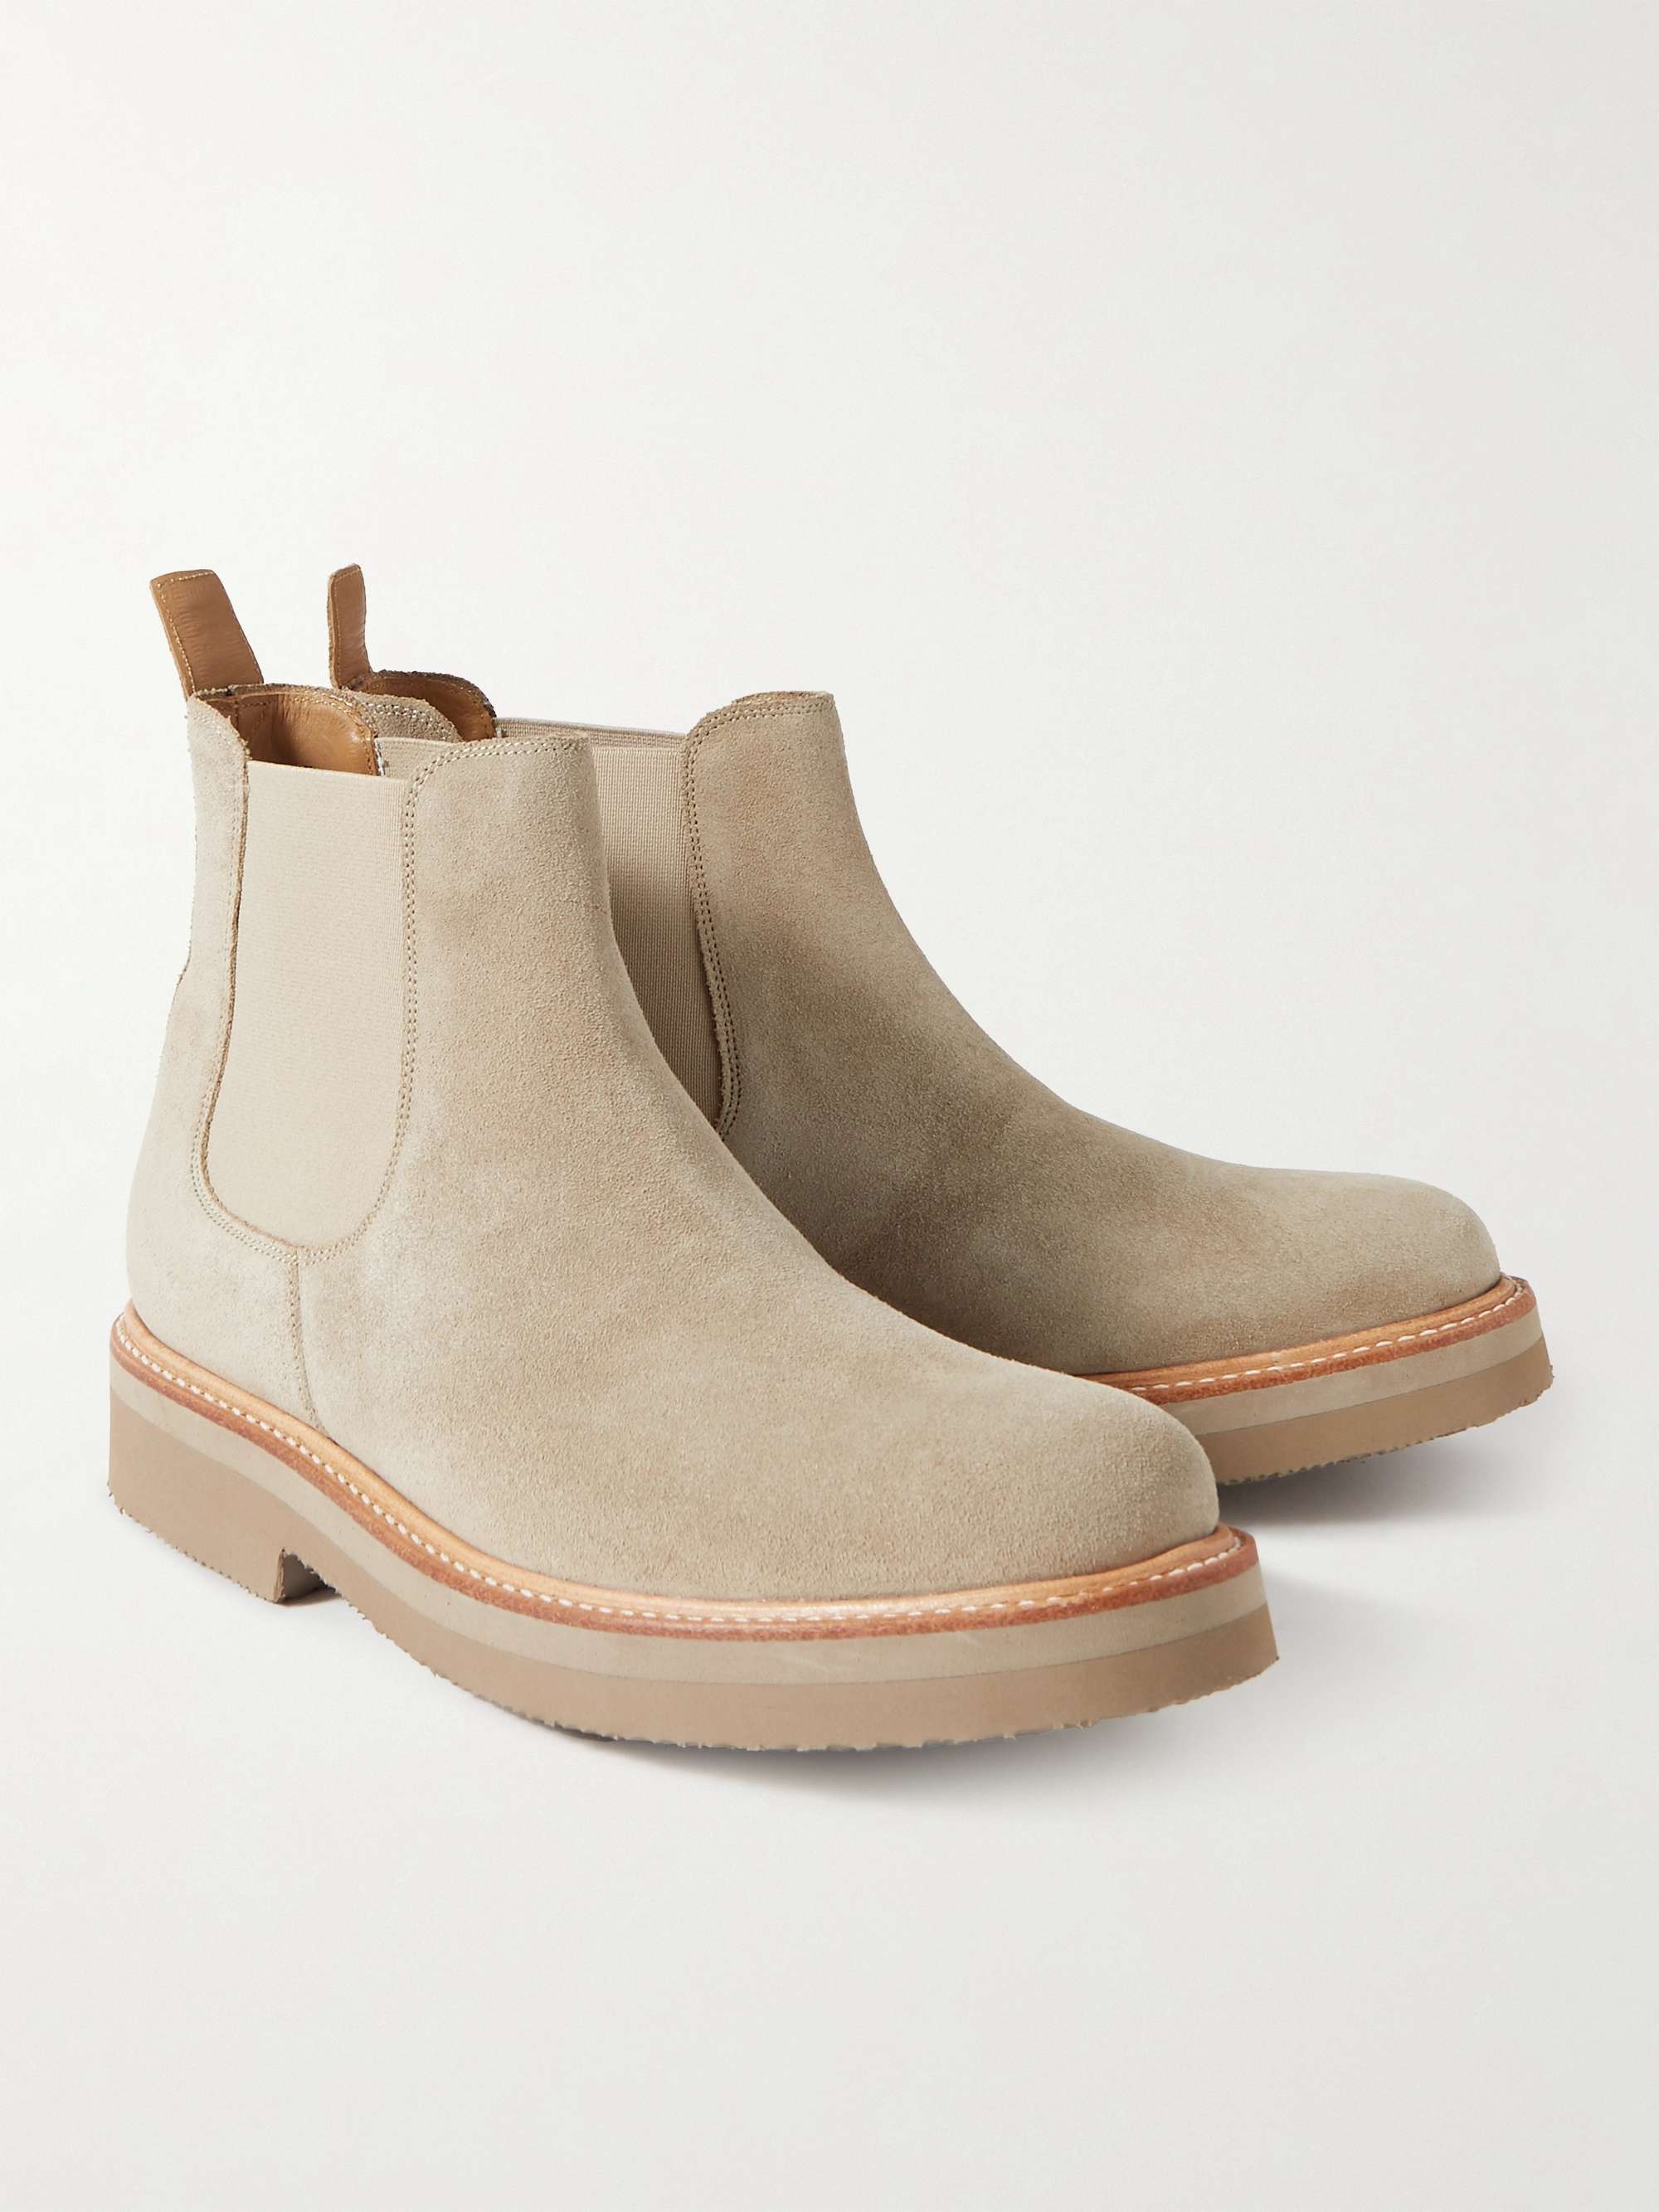 GRENSON Suede Chelsea Boots | PORTER